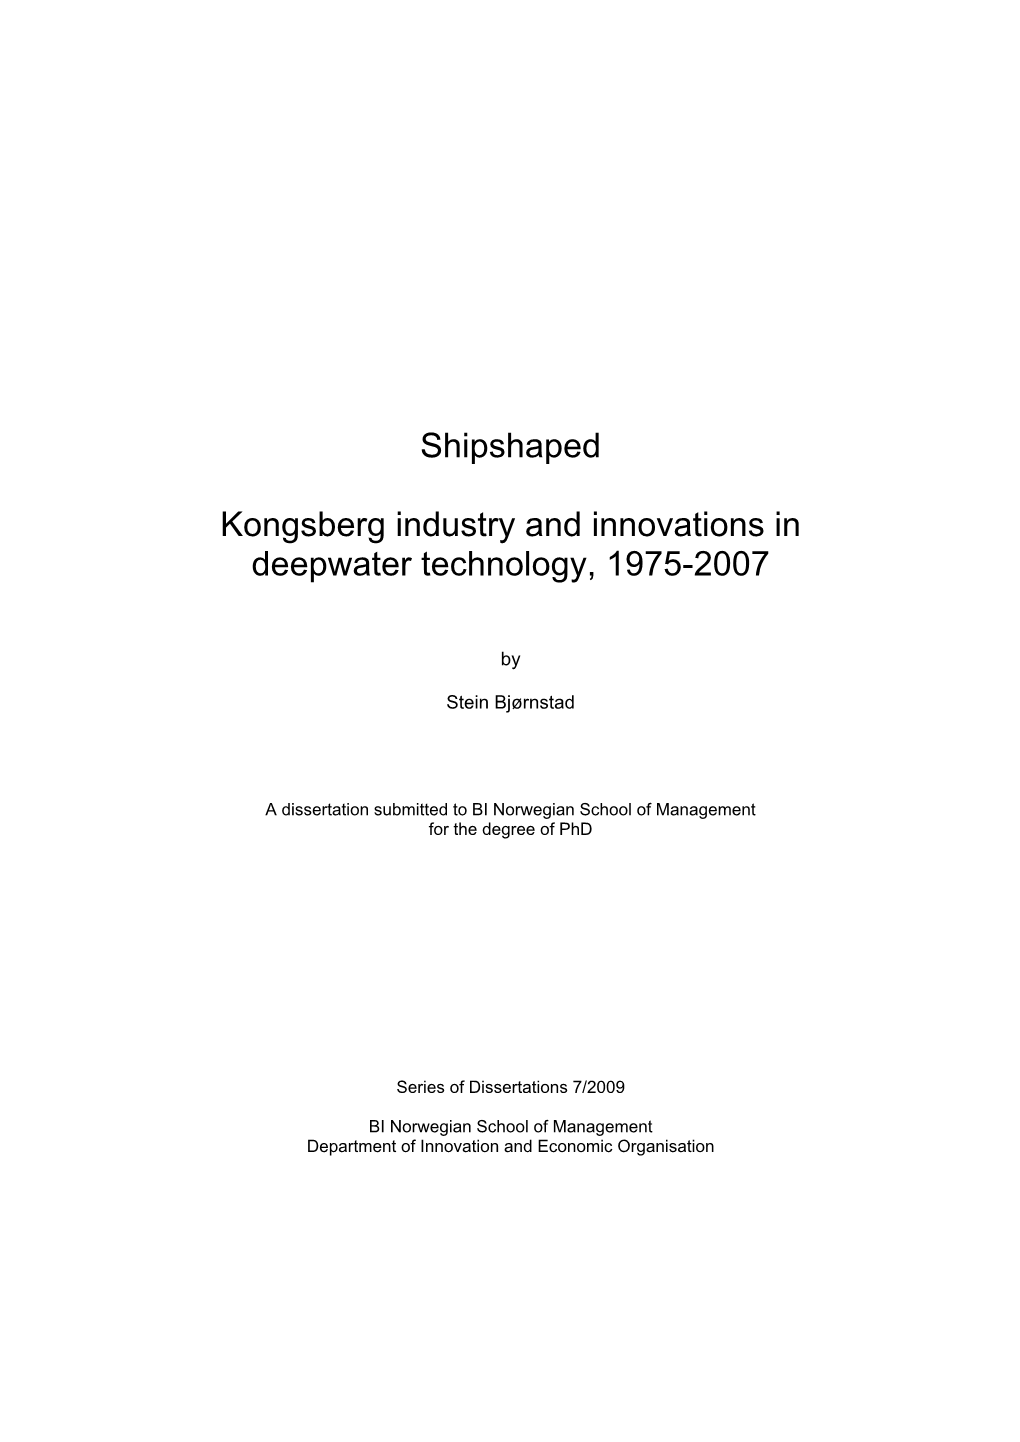 Shipshaped Kongsberg Industry and Innovations in Deepwater